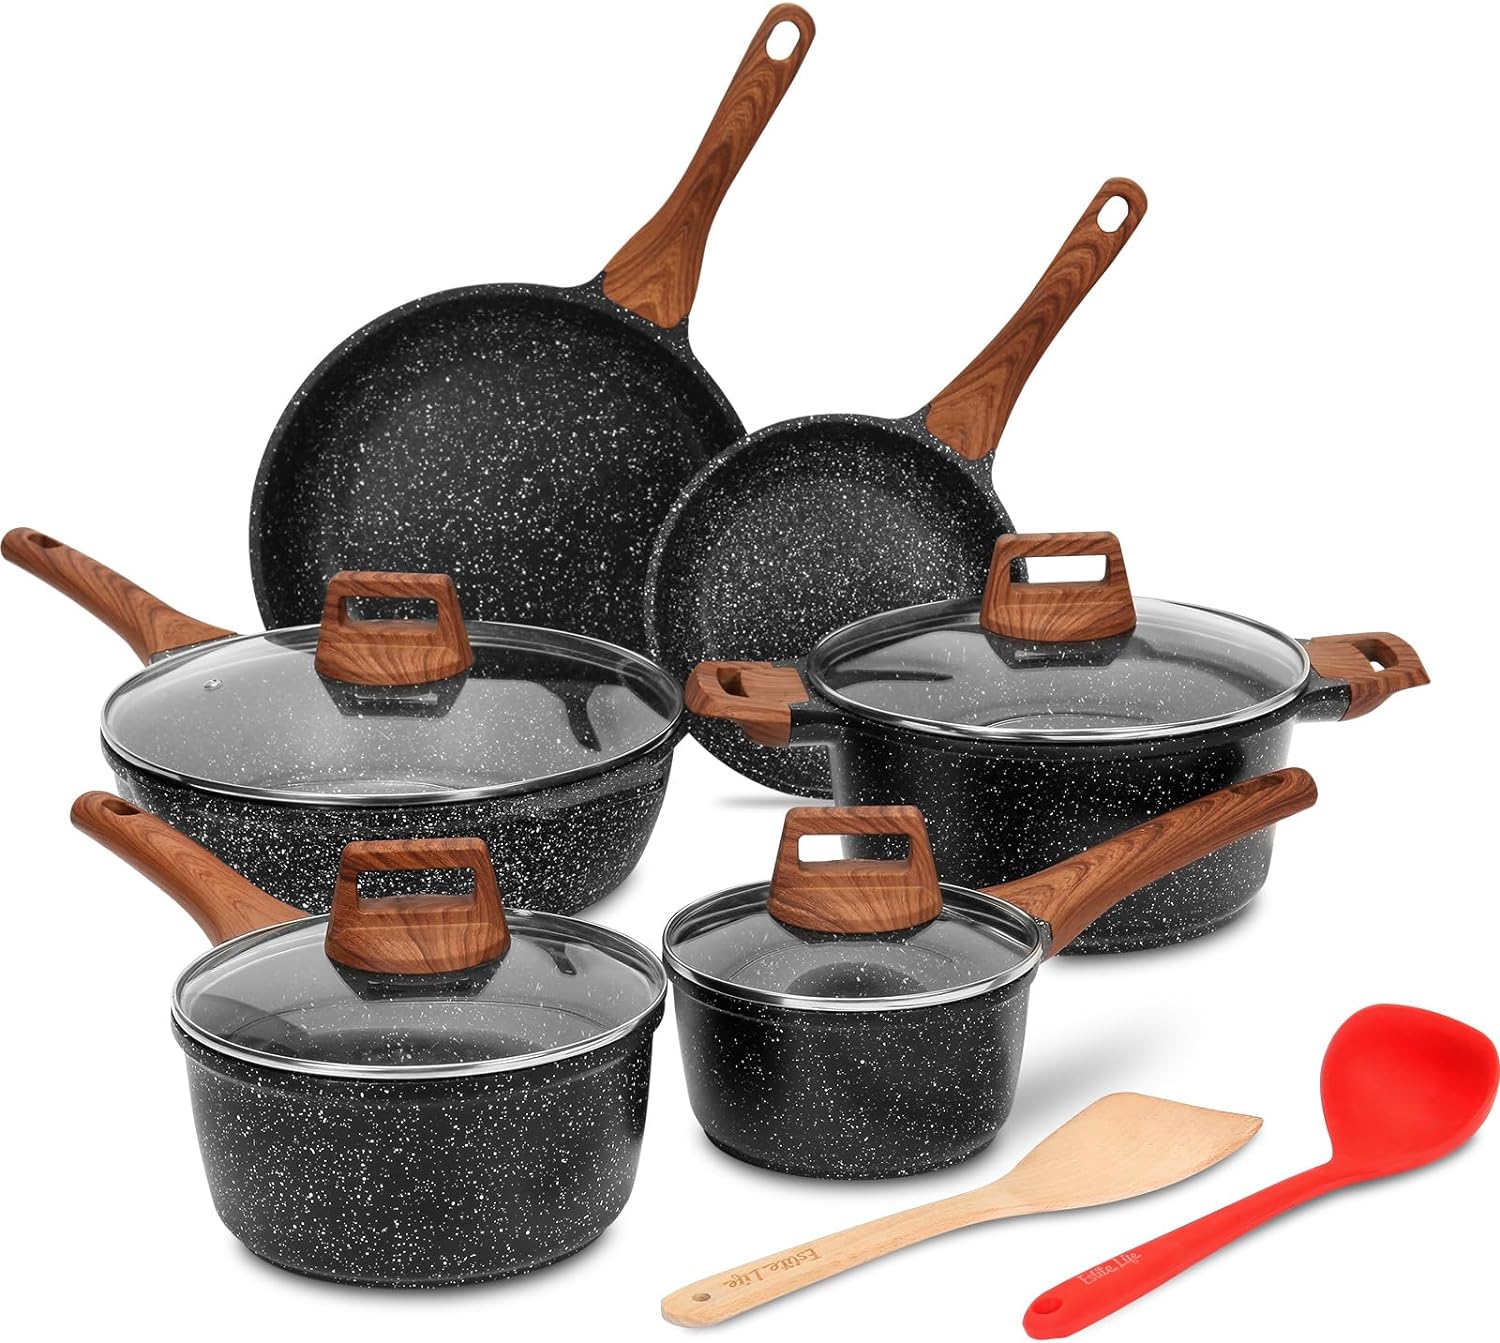 ESLITE LIFE Nonstick Cookware Sets, 12 Pcs Granite Coating Pots and Pans Set Kitchen Cooking Set, Compatible with All Stovetops (Gas, Electric & Induction), PFOA Free, Black